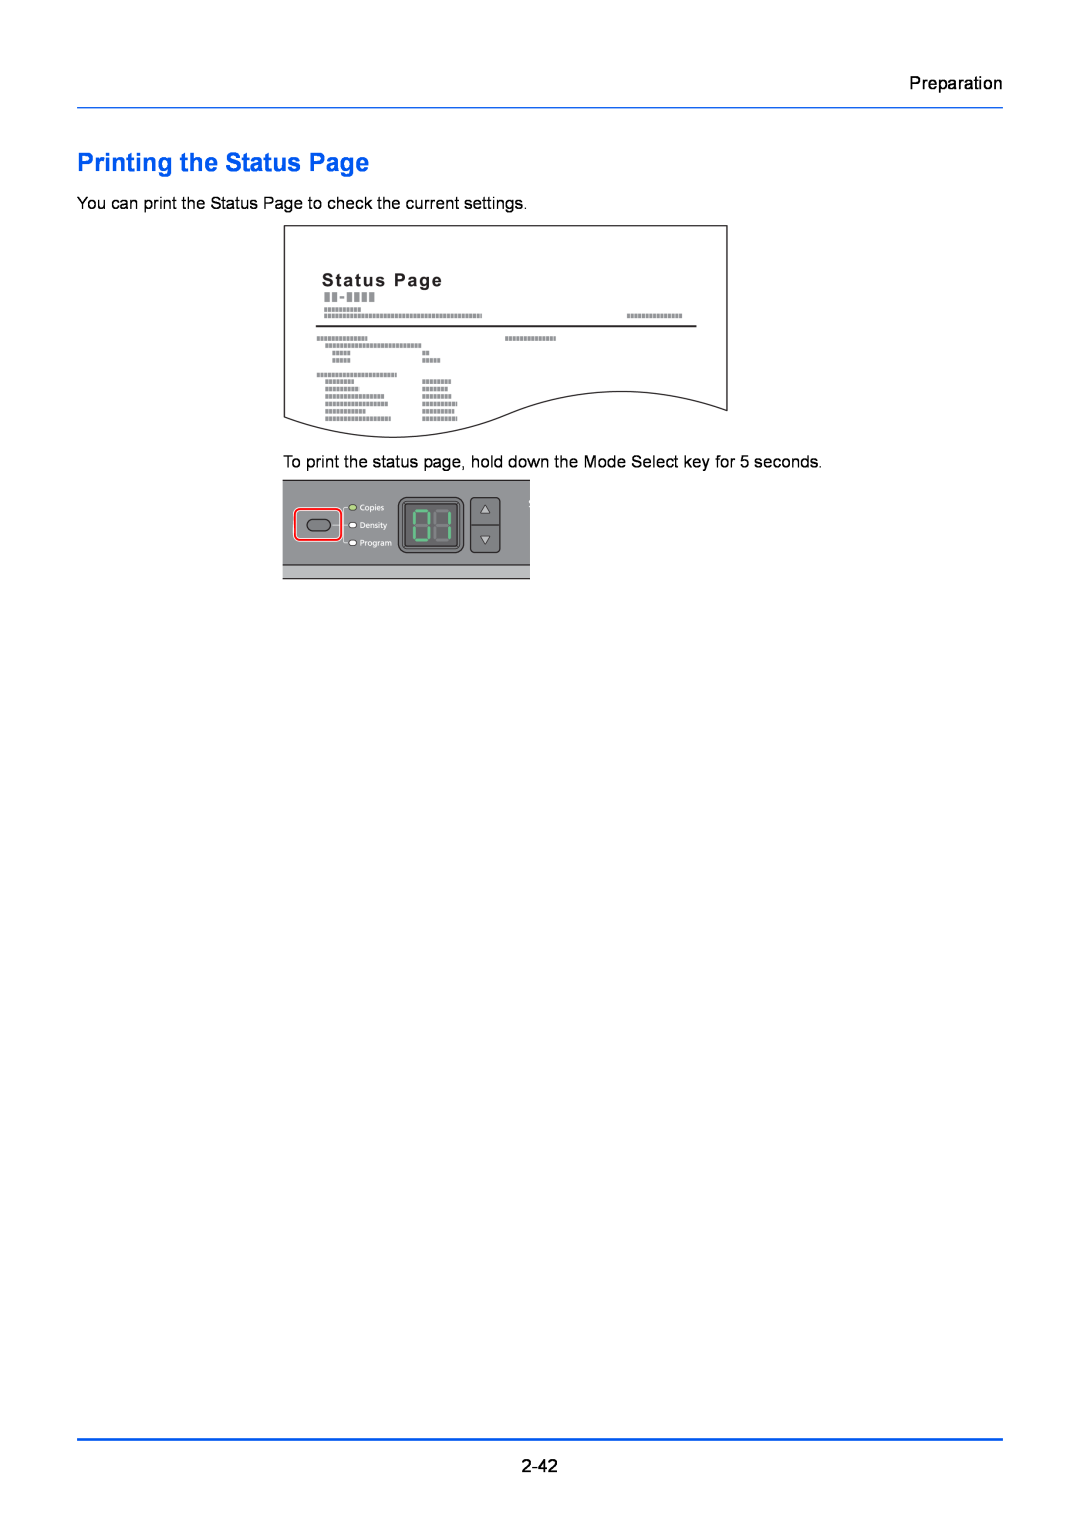 Kyocera FS-1020MFP Printing the Status Page, Preparation, You can print the Status Page to check the current settings 